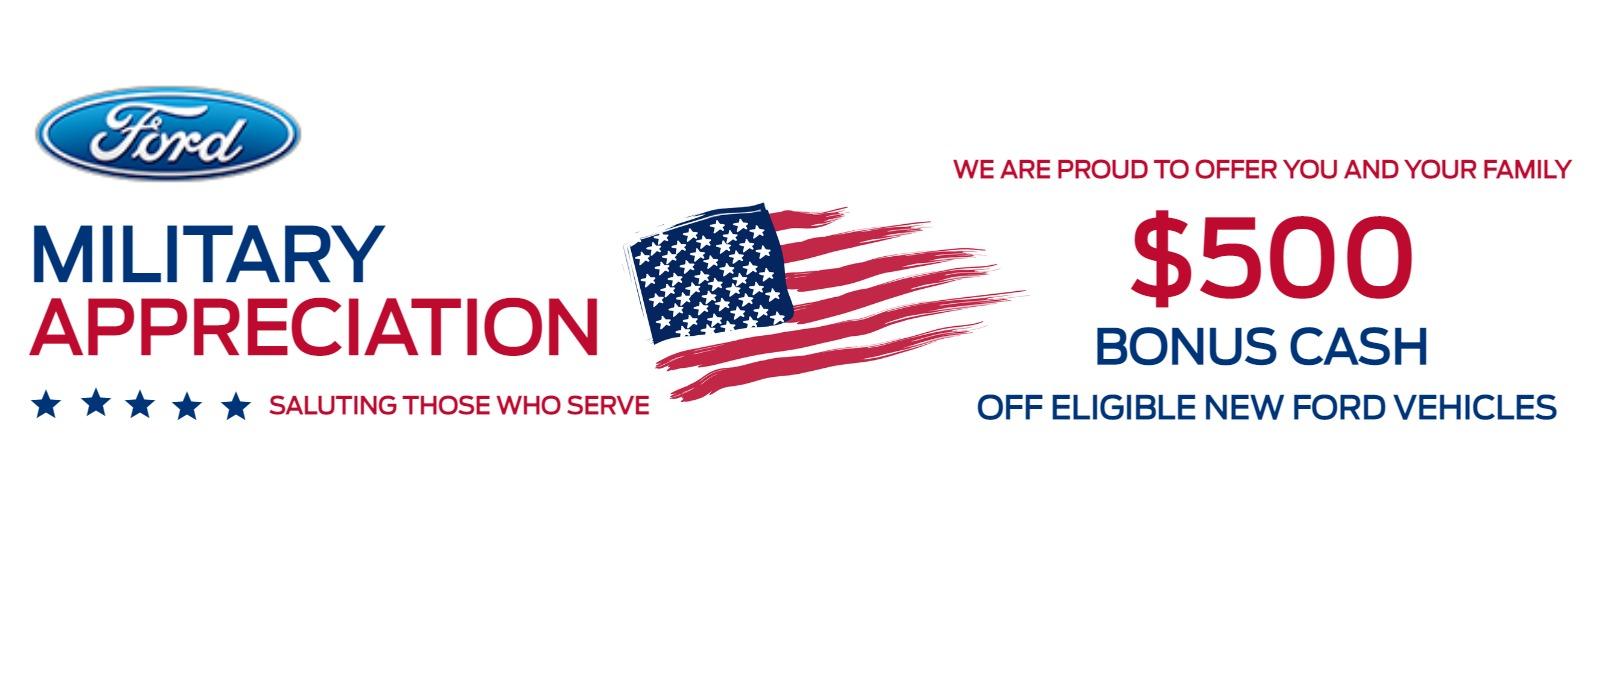 MILITARY APPRECIATION 
SALUTING THOSE WHO SERVE 

WE ARE PROUD TO OFFER YOU AND YOUR FAMILY 
$500
BONUS CASH
OFF ELIGIBLE NEW FORD VEHICLES